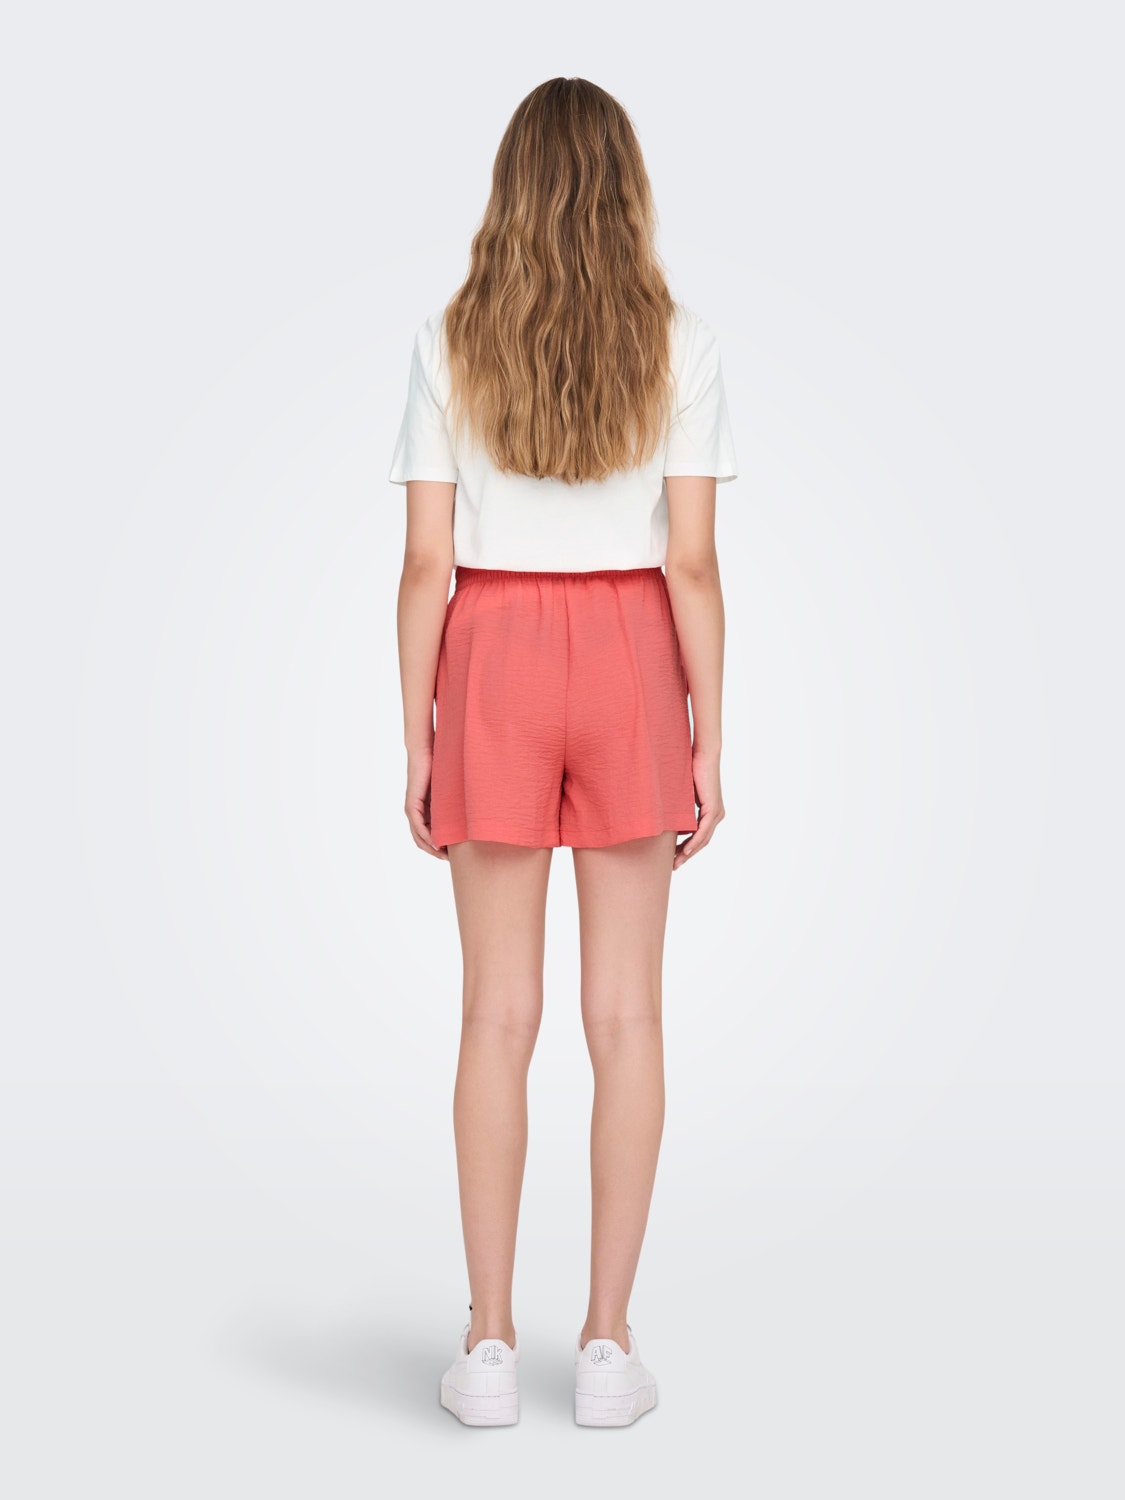 ONLY Solid colored Shorts -Georgia Peach - 15229049